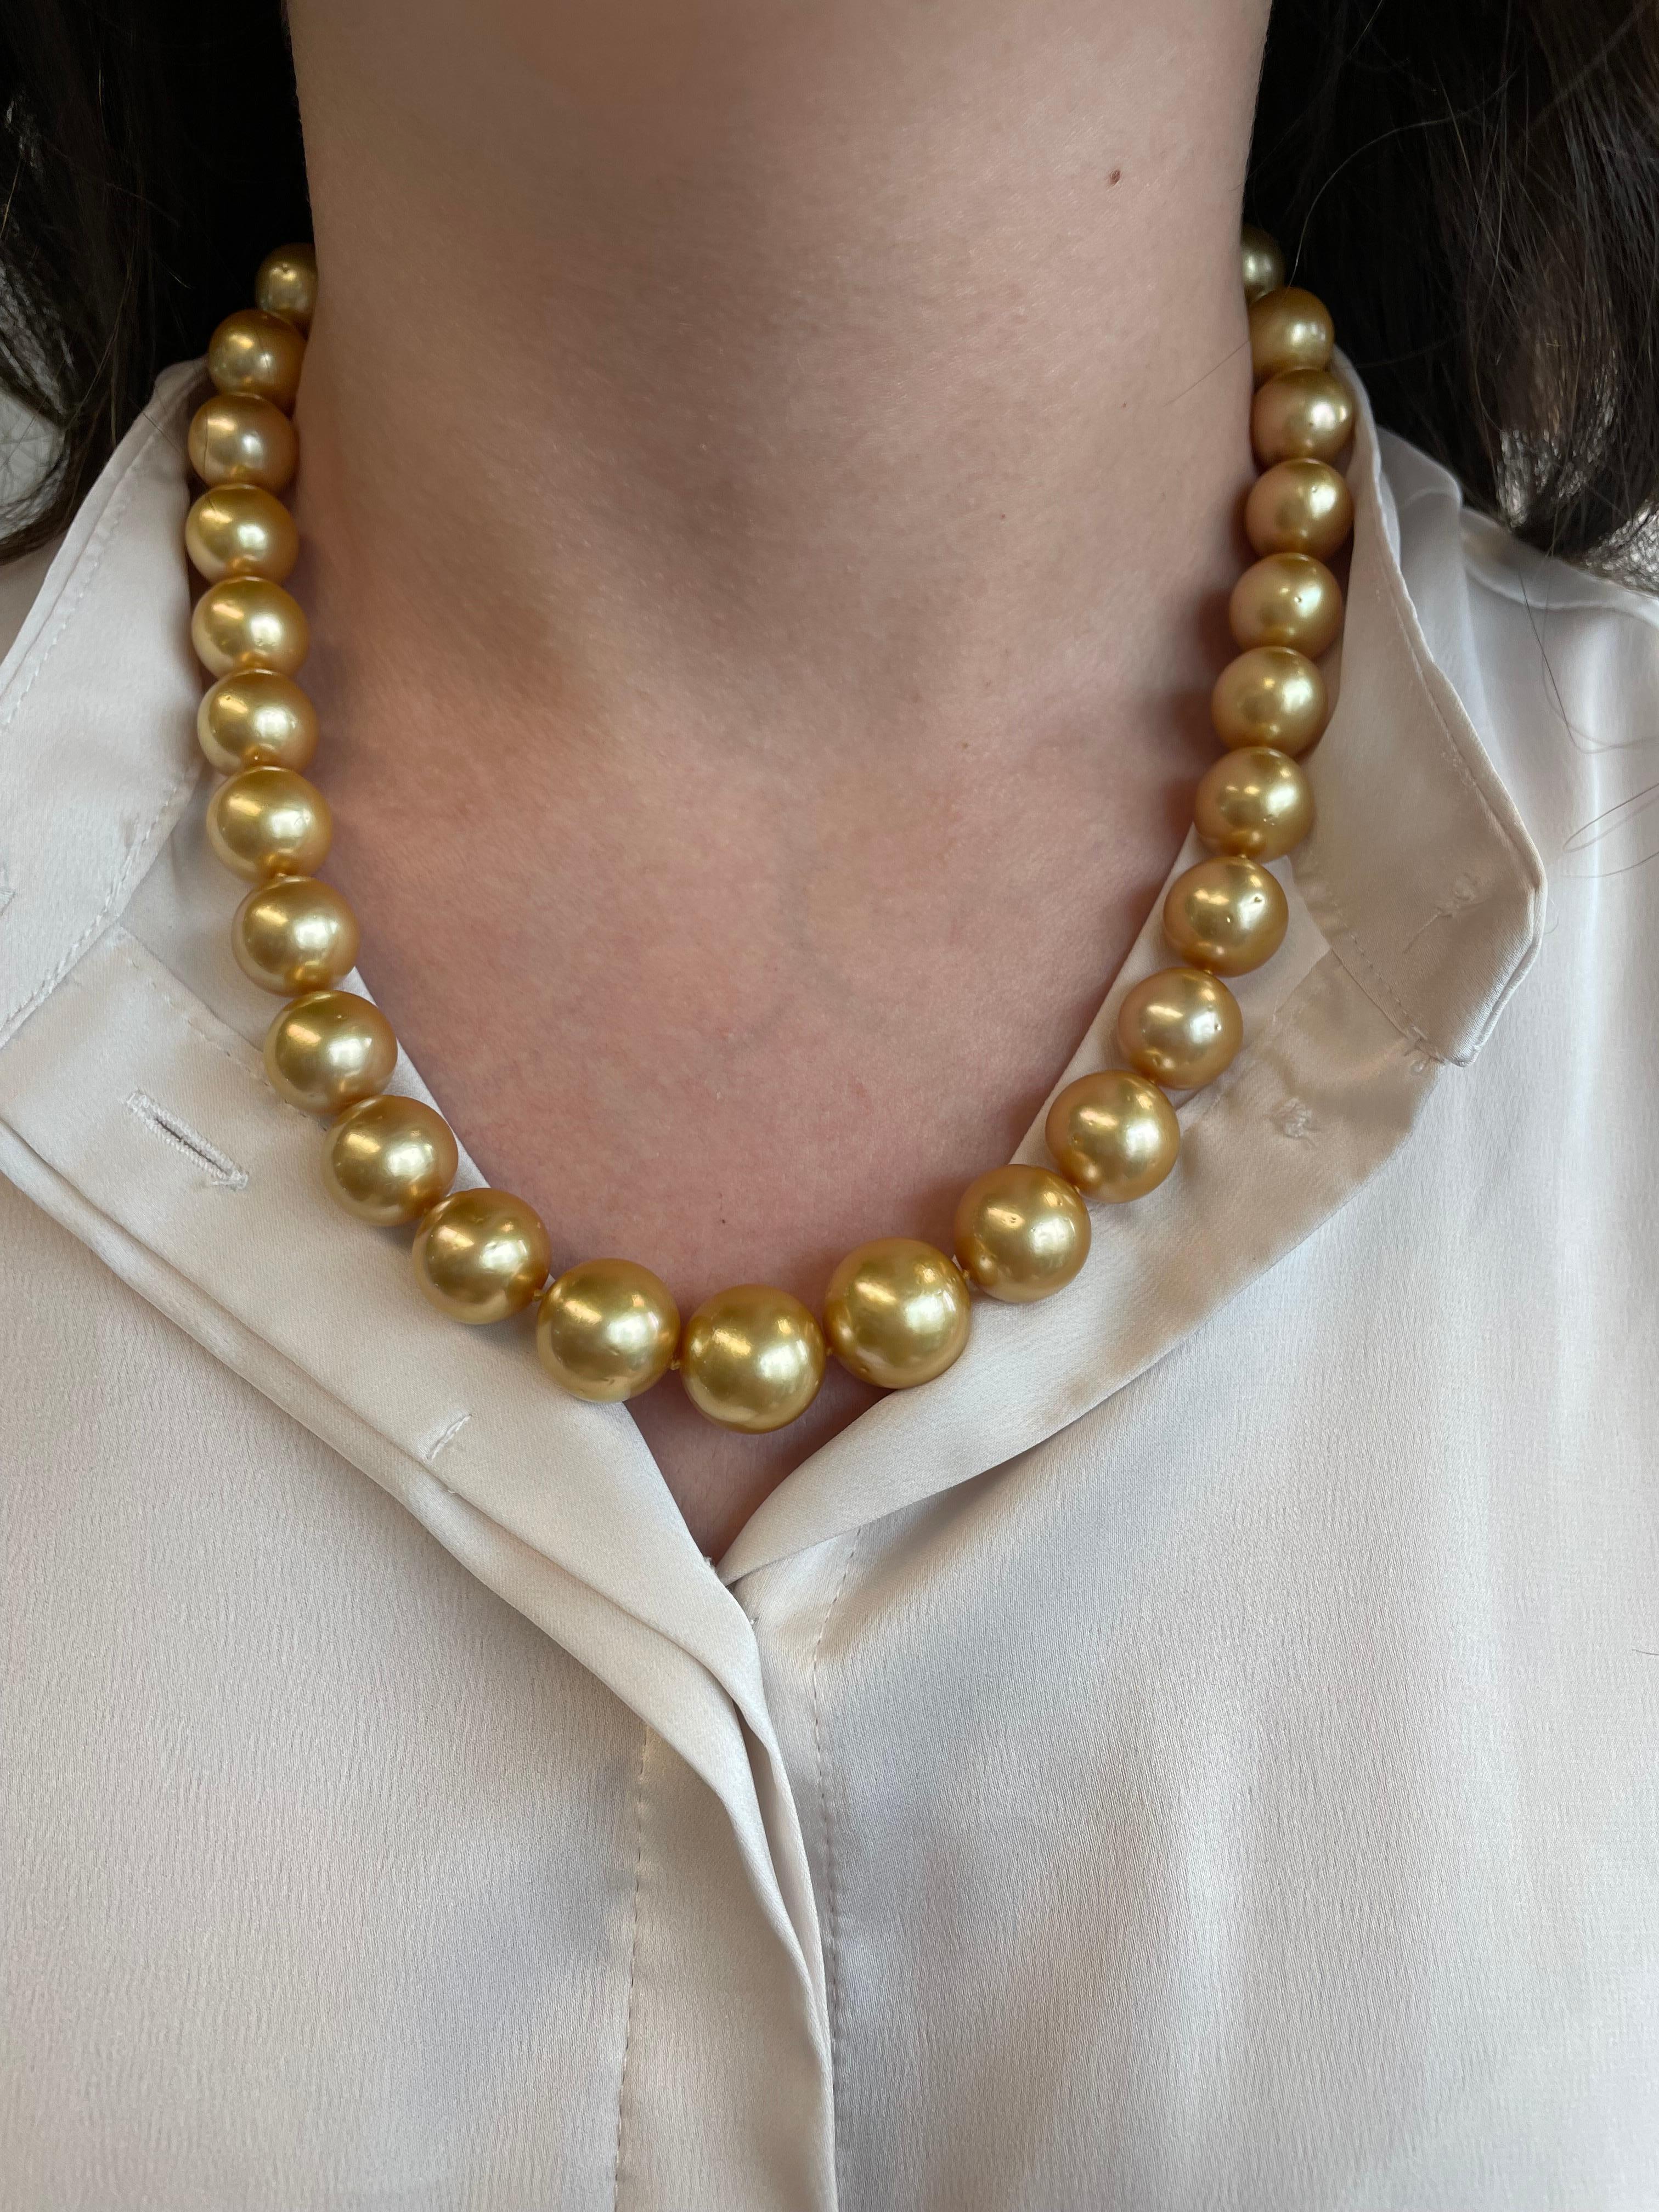 33 golden South Sea pearls, graduated from 15-12mm.
Yellow gold clasp with diamonds. 
Accommodated with an up to date appraisal by a GIA G.G. upon request. Please contact us with any questions.

Item Number 
N6461